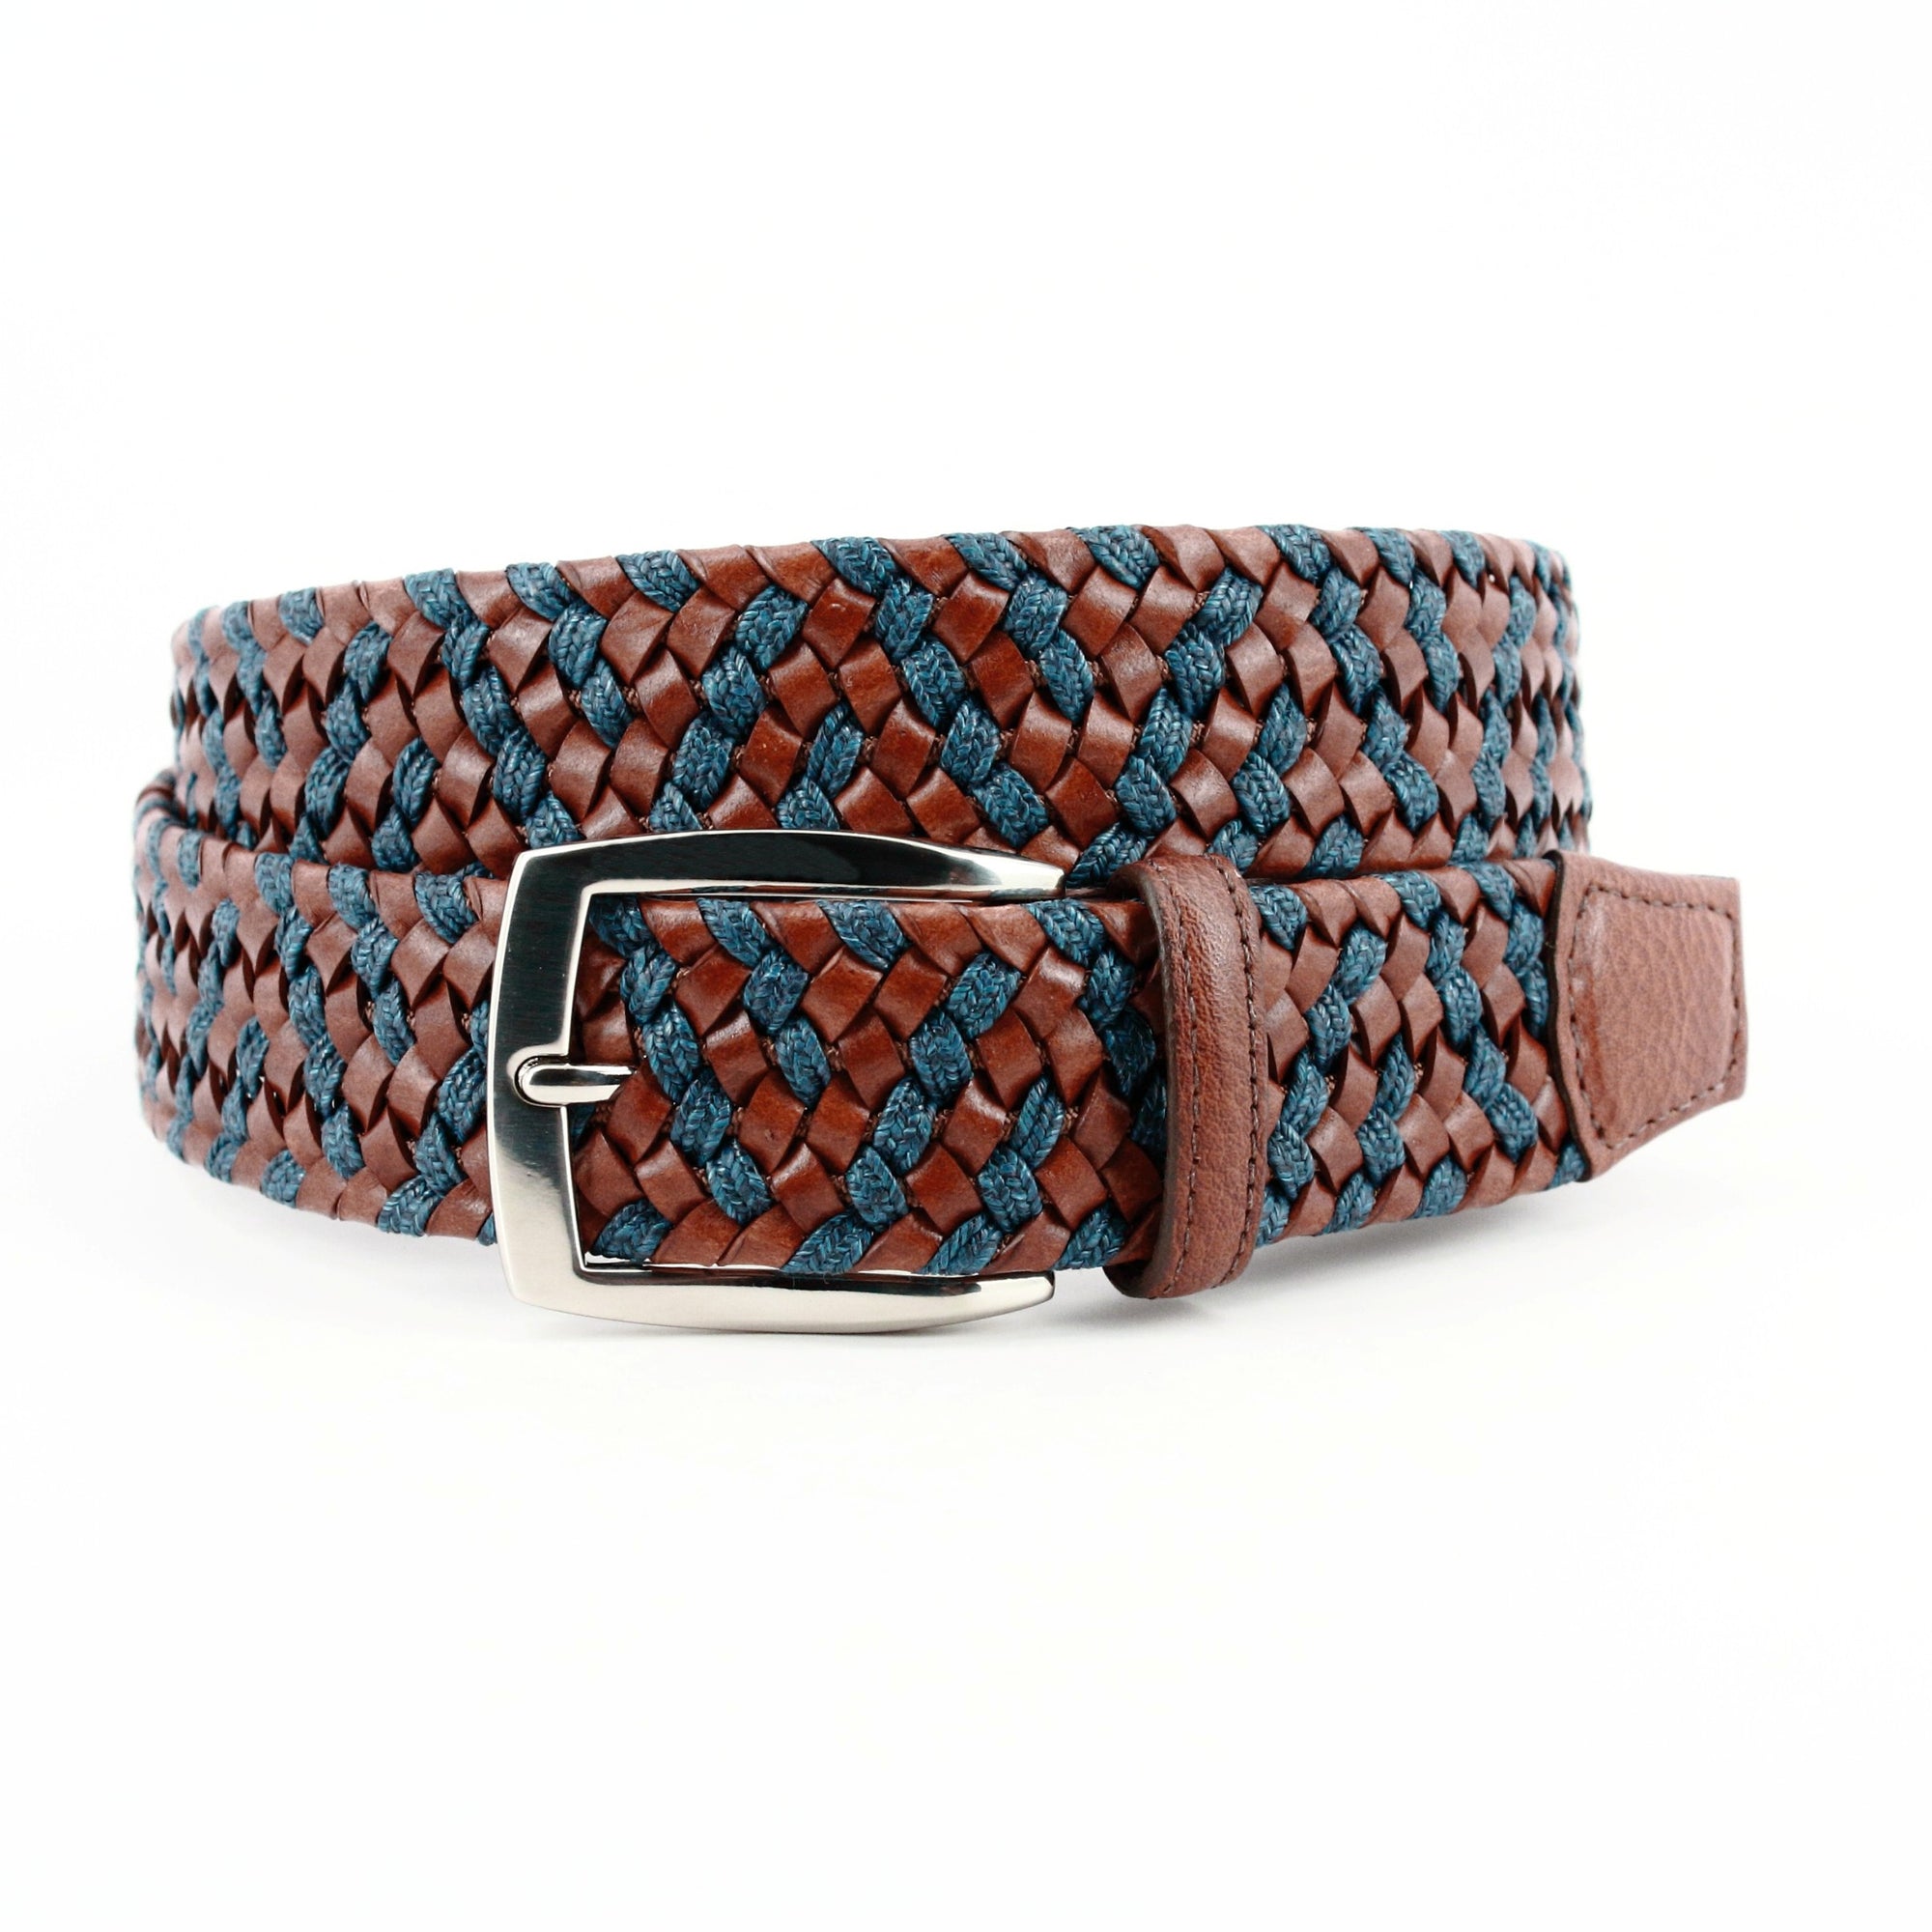 Braided Italian Leather and Linen Belt in Cognac and Navy by Torino Leather